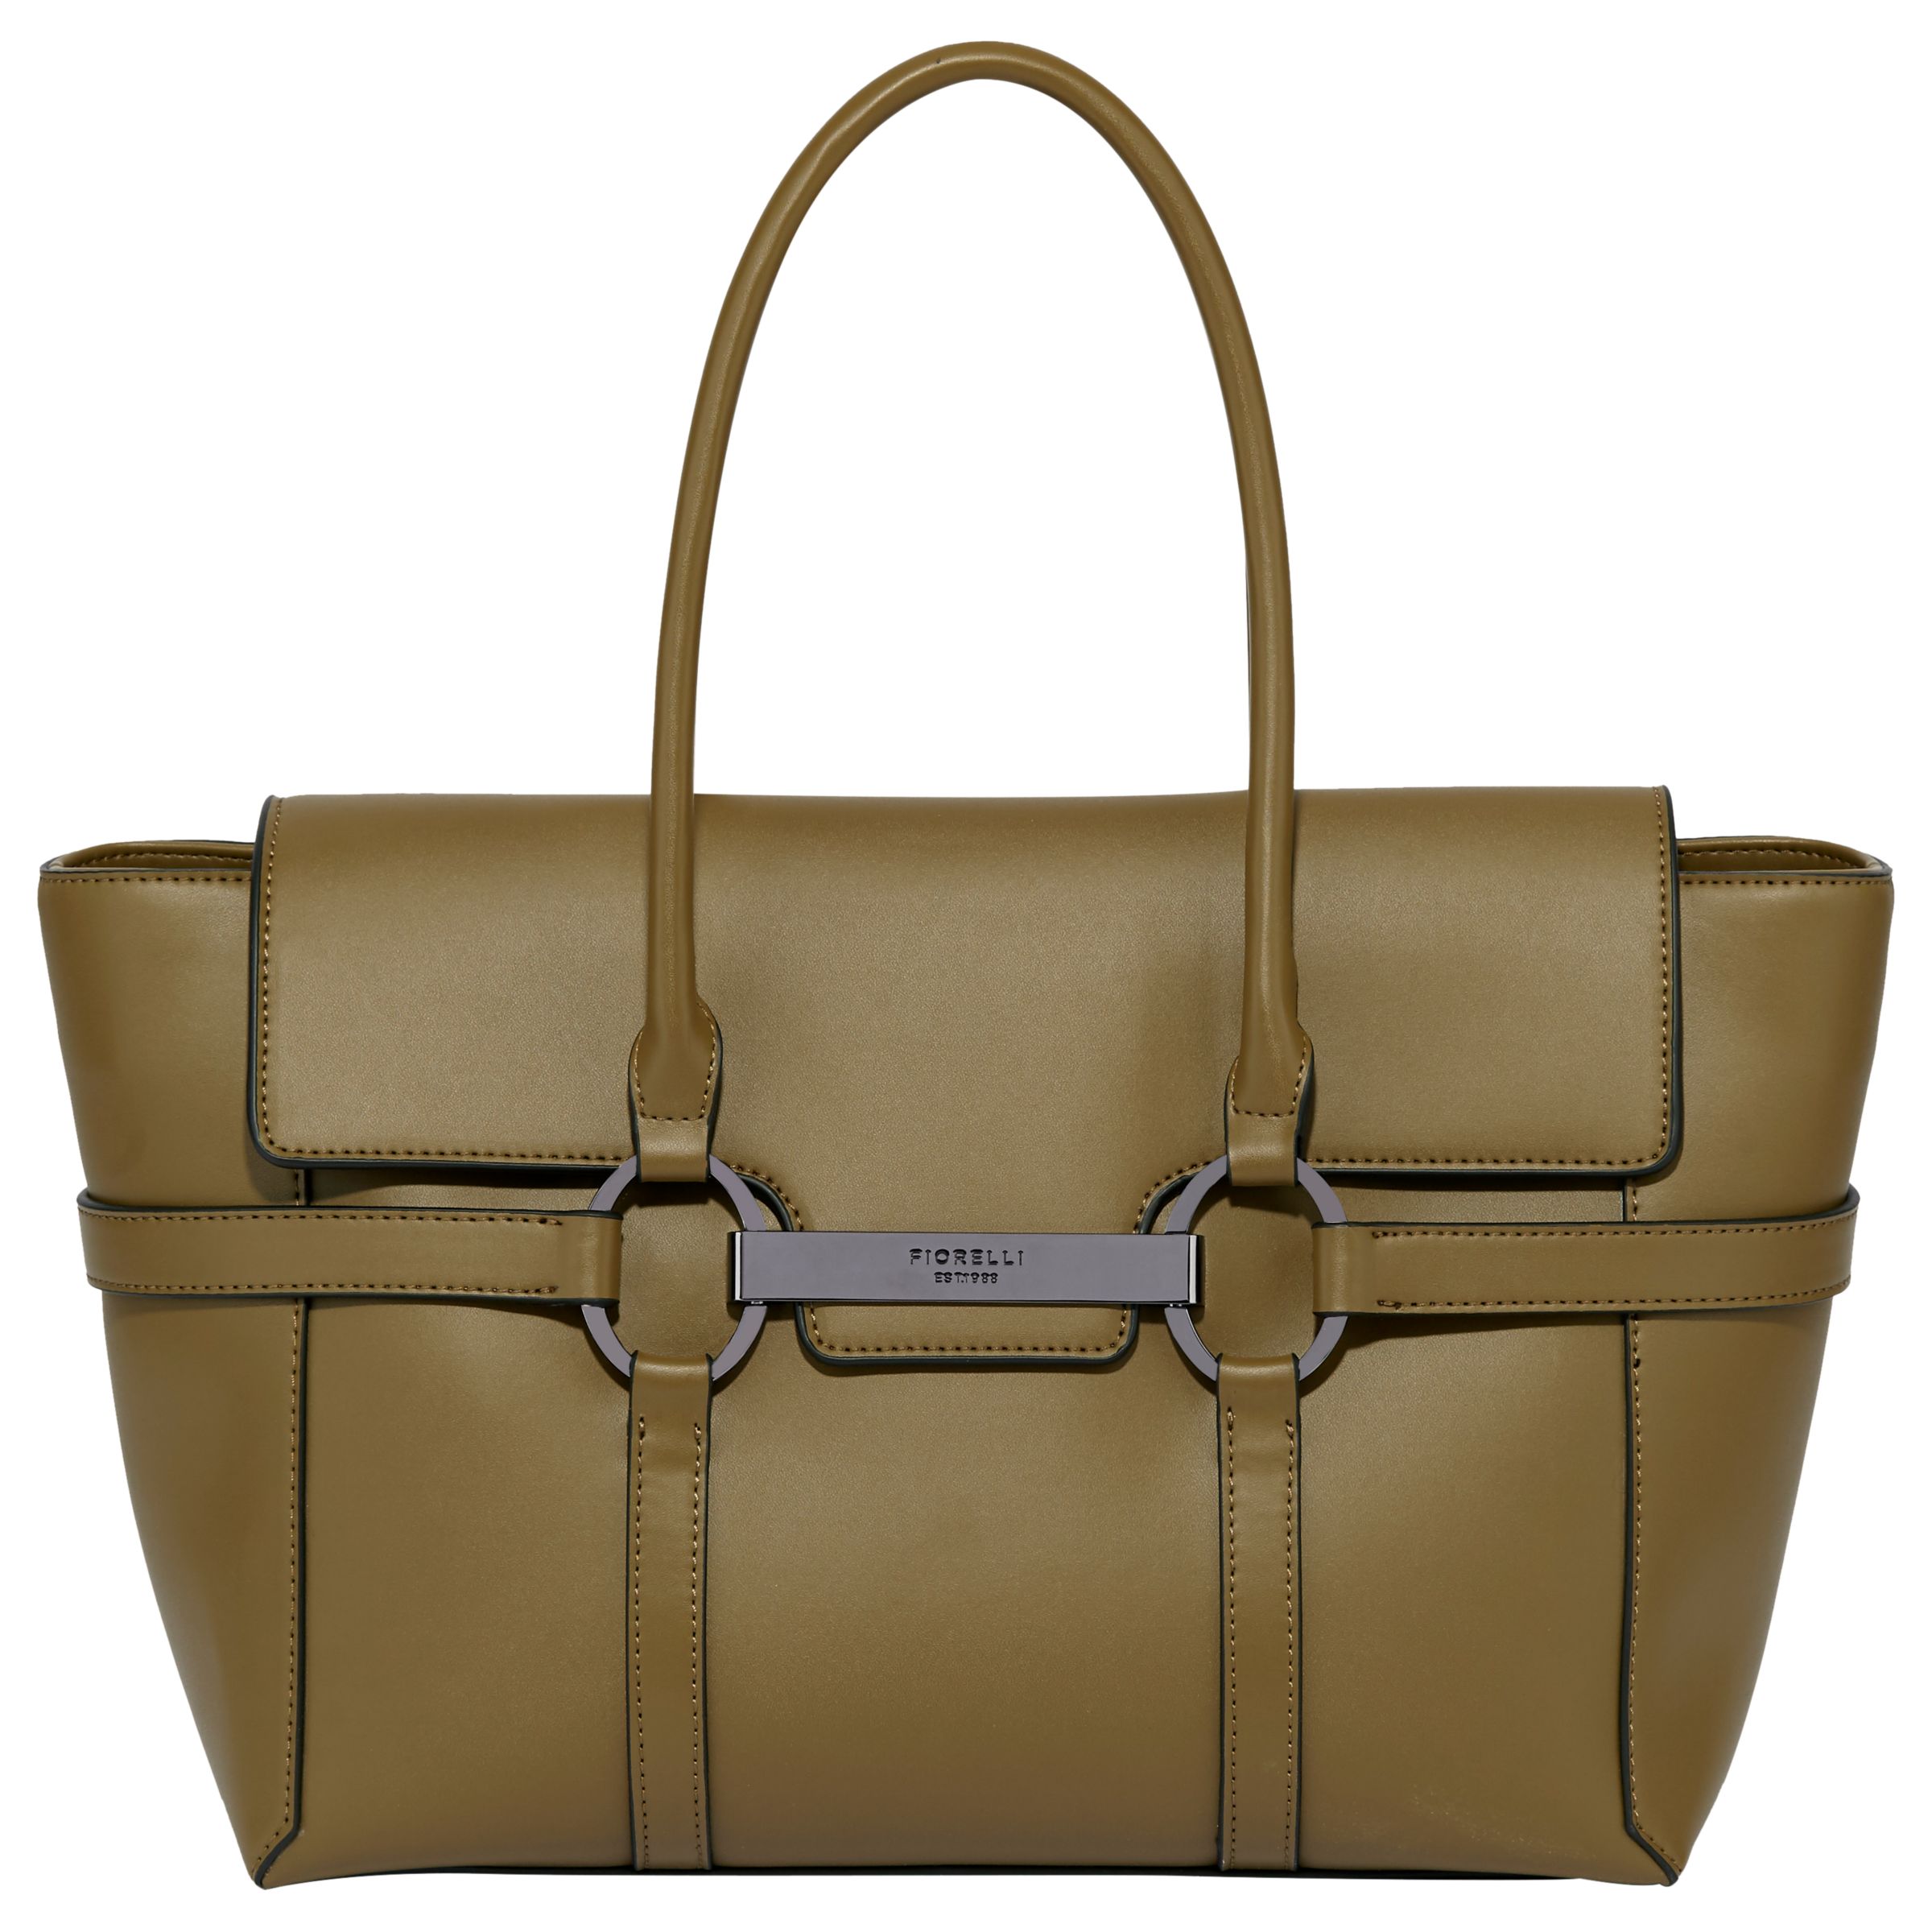 Fiorelli Barbican Large Flapover Tote Bag, Olive at John Lewis & Partners